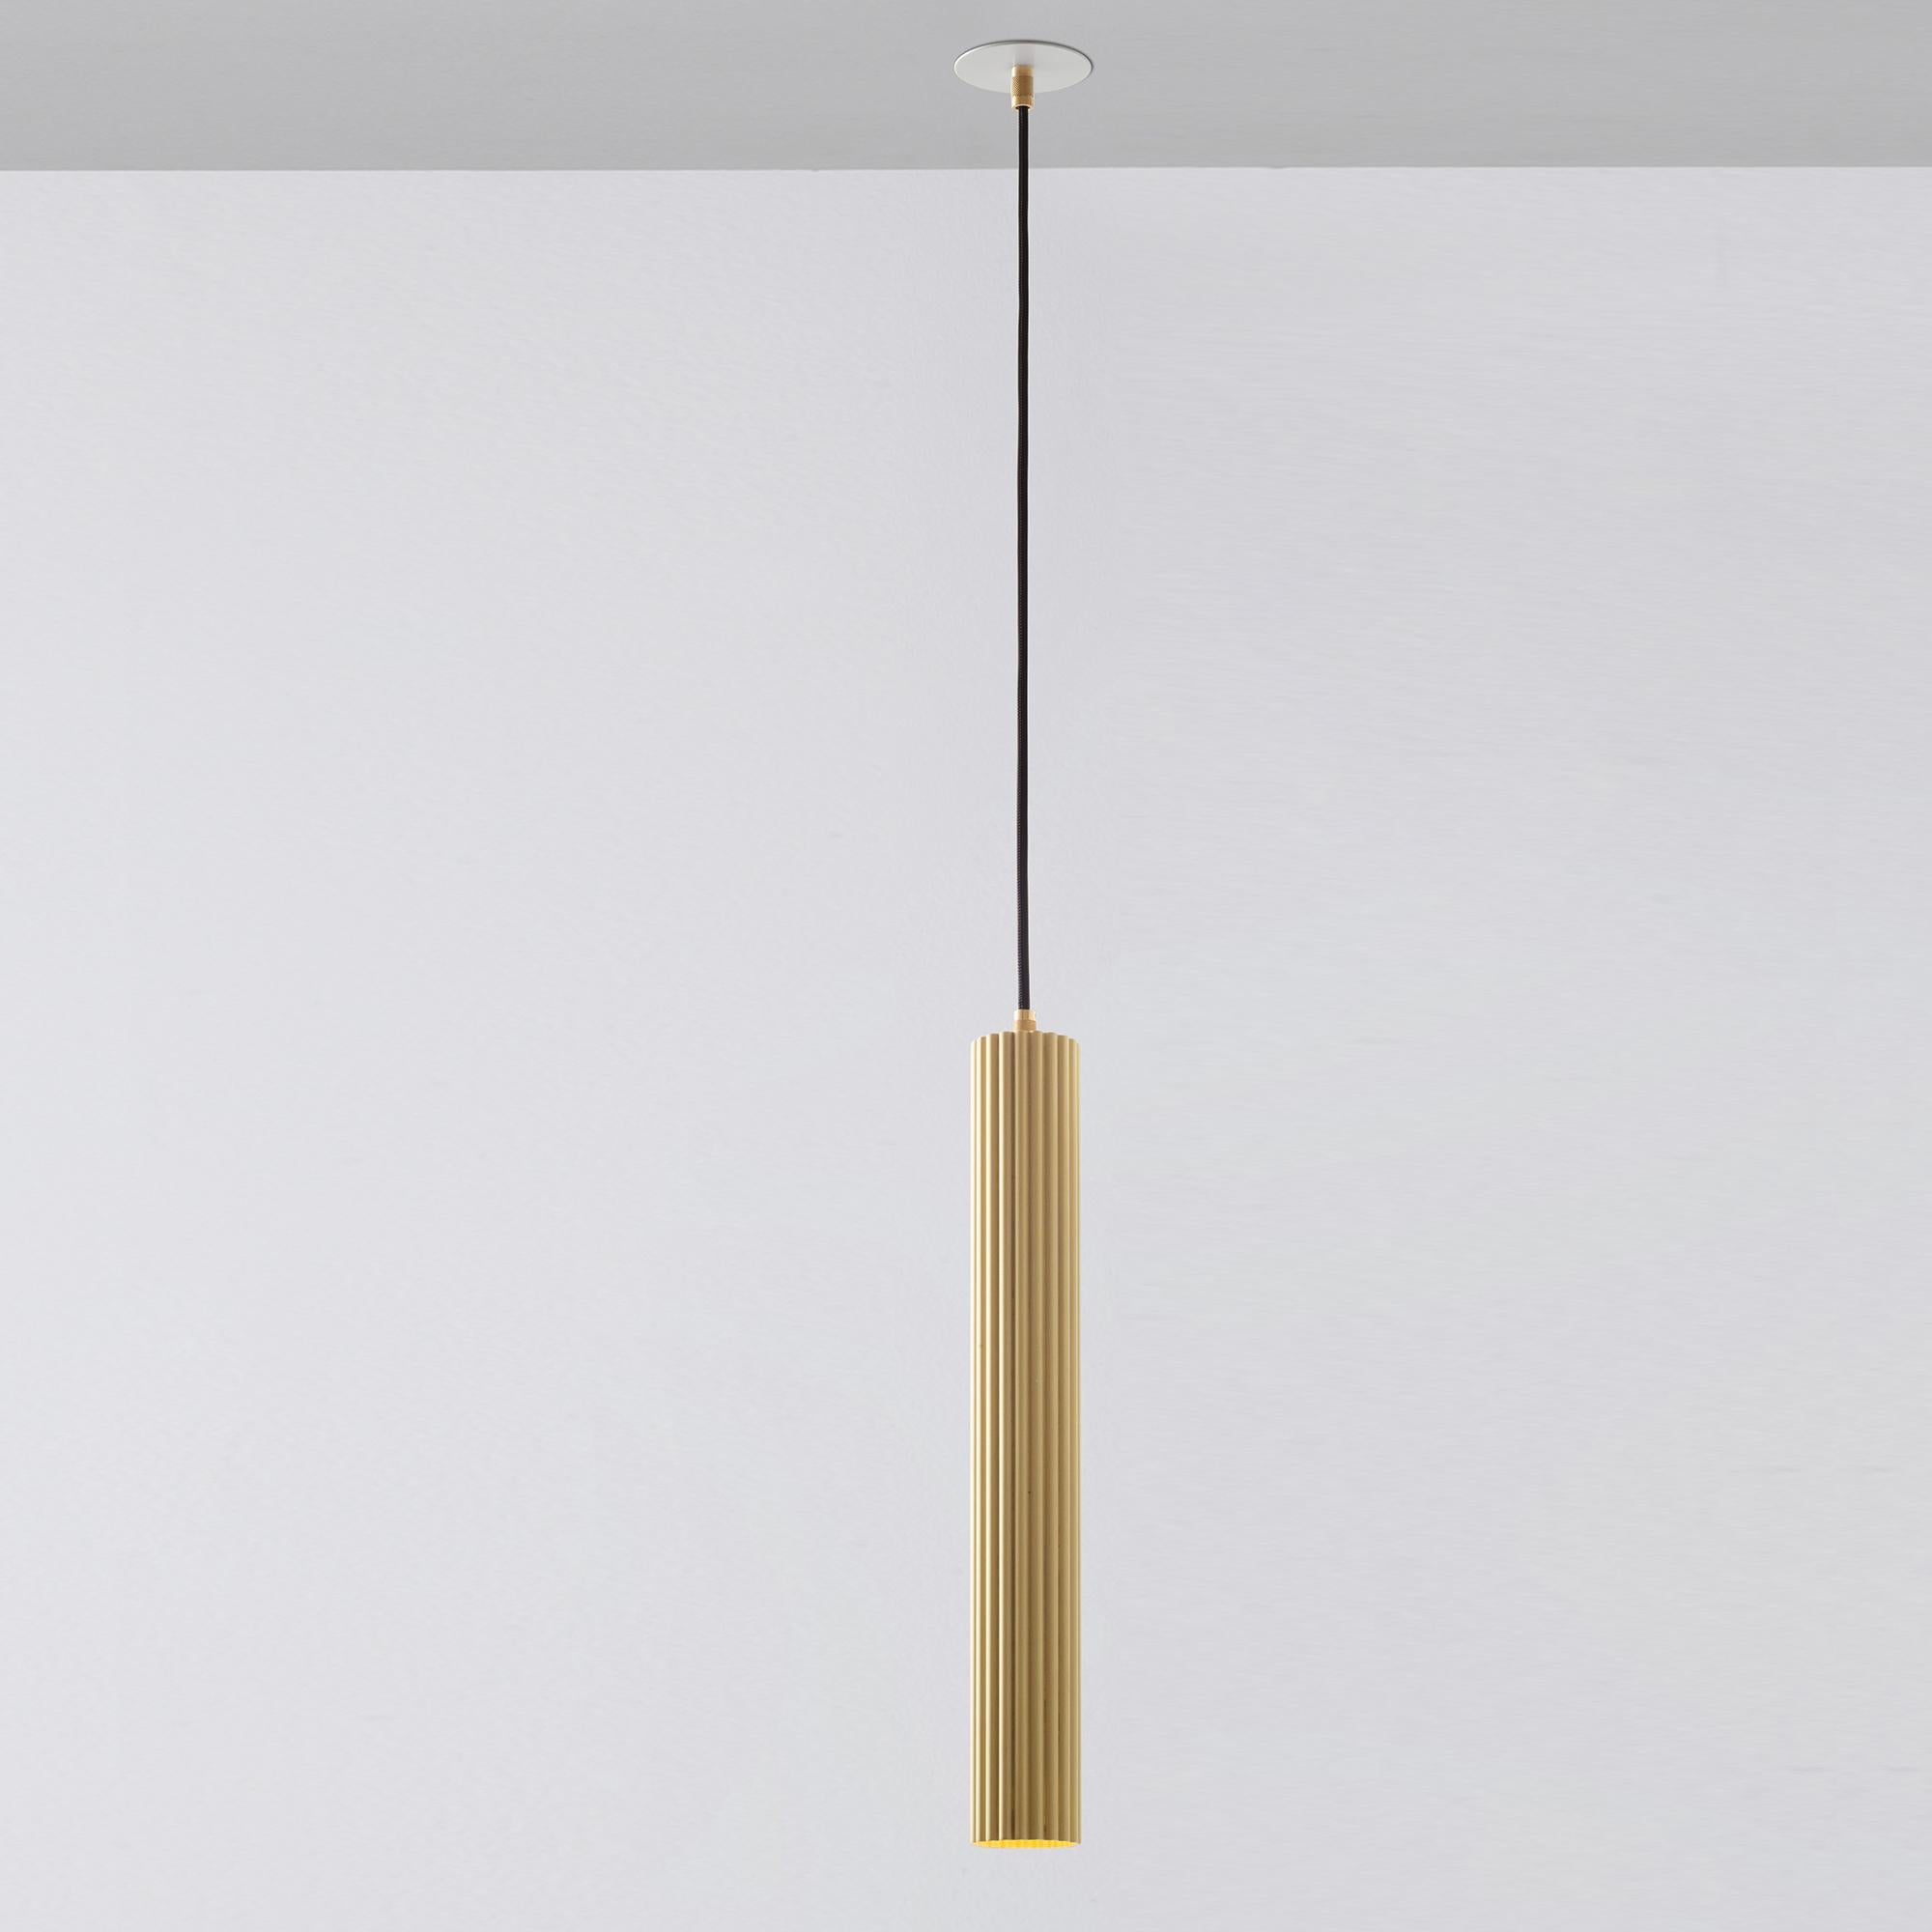 Lustrin pendant by Luce Tu
Dimensions: 450 mm x 80 mm
Materials: Brass

State-of-the-art technology and craftsmanship come together in this suspension with an almost timeless charm. Like a precious jewel, the Sbarlusc collection is perfect for